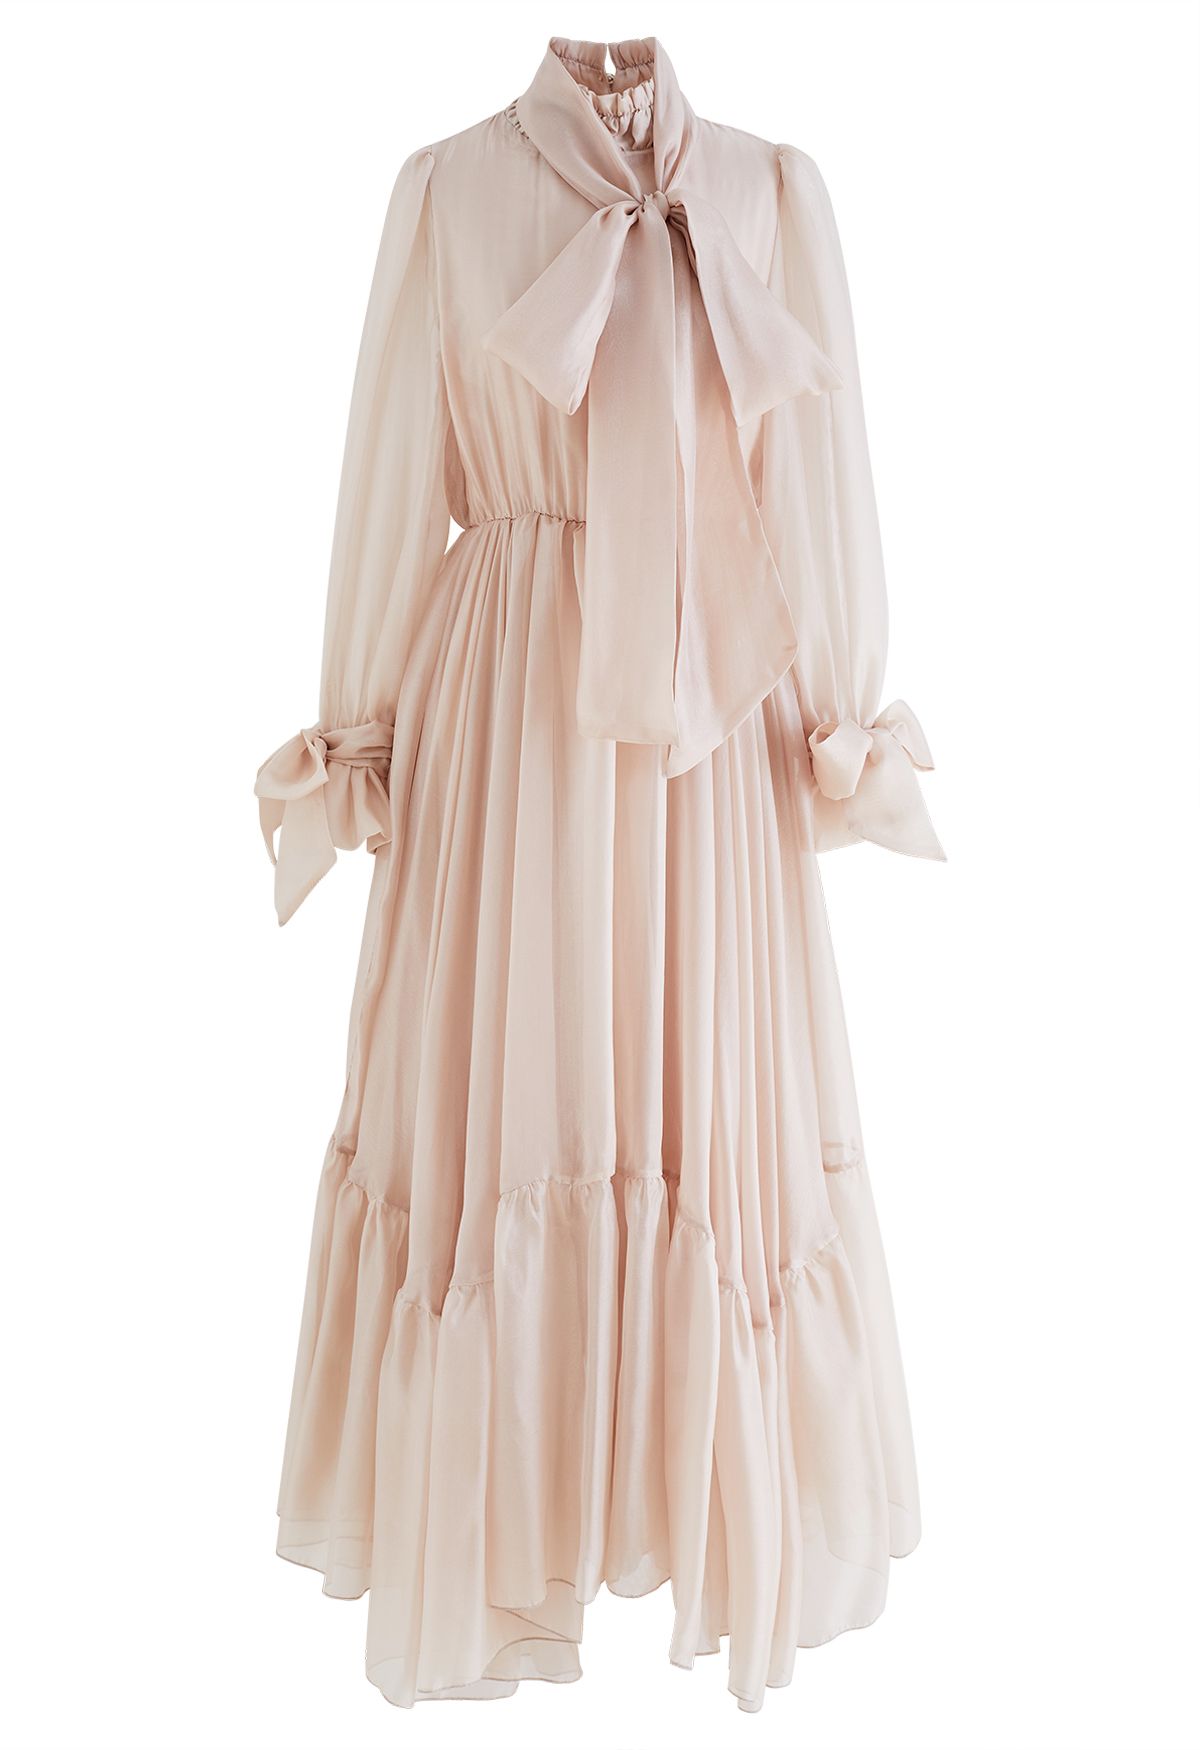 Gorgeous Bow Neck Sheer Mesh Frilling Dress in Apricot